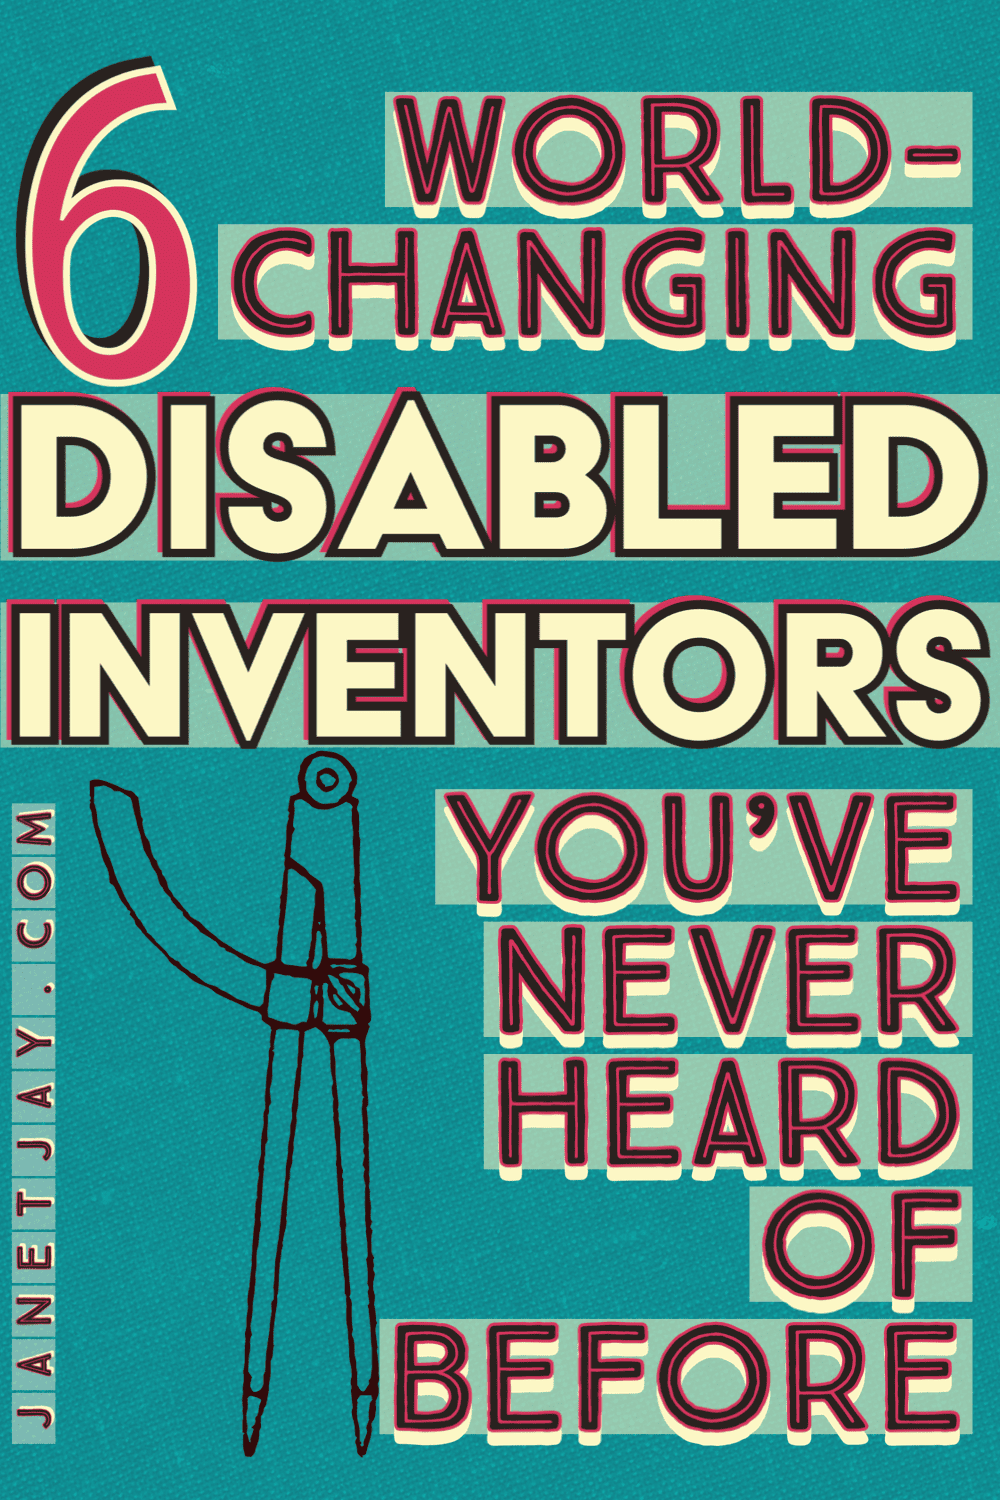 line image of an old-school compass, text reads "6 world-changing disabled inventors you've never heard of before, janetjay.com
